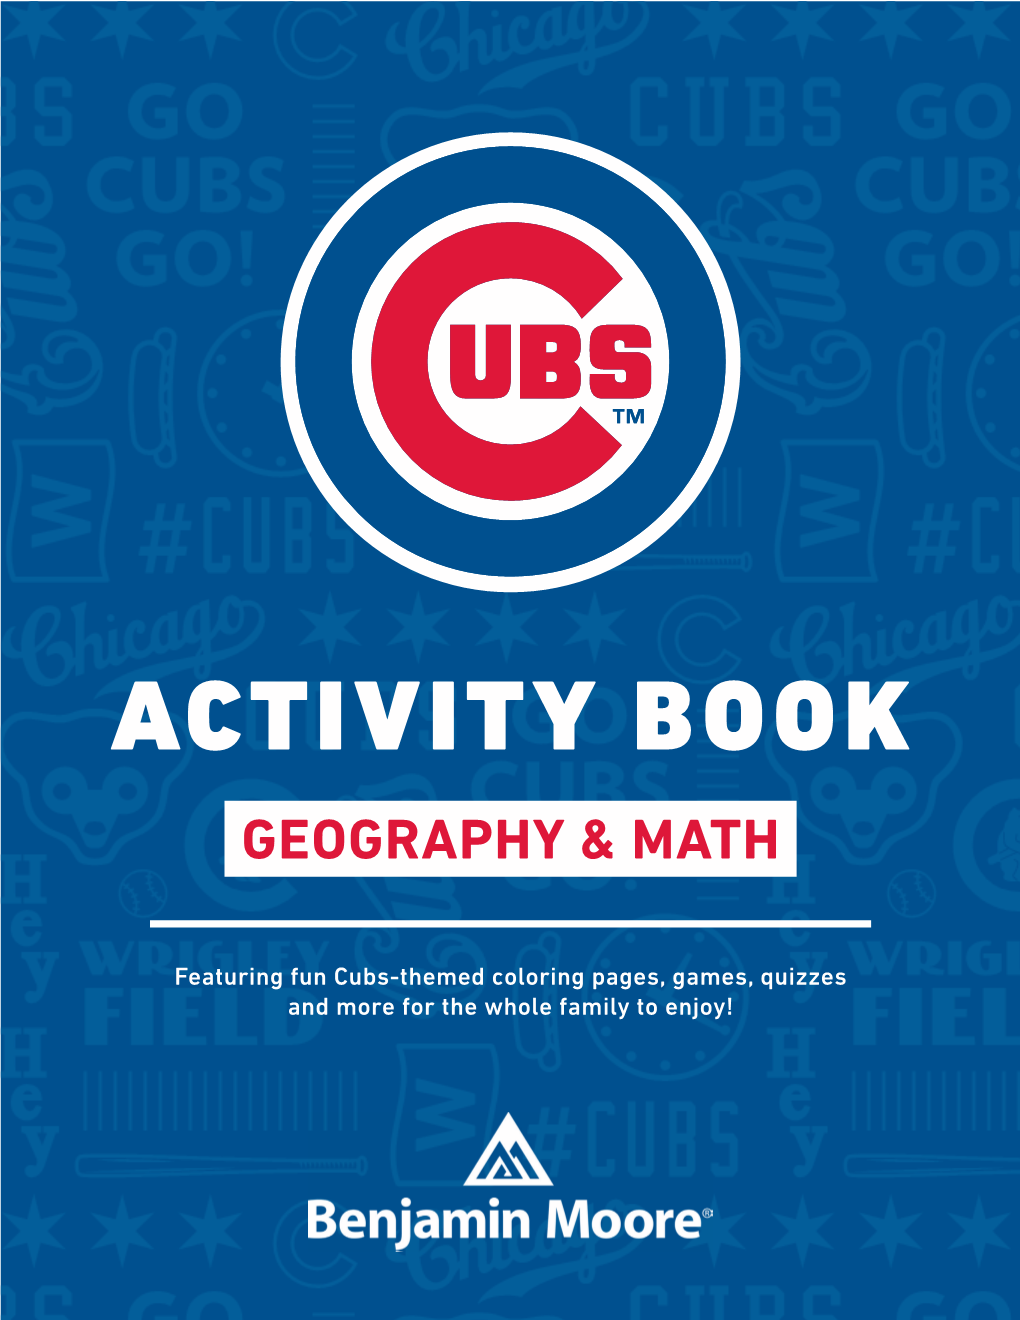 Activity Book Geography & Math